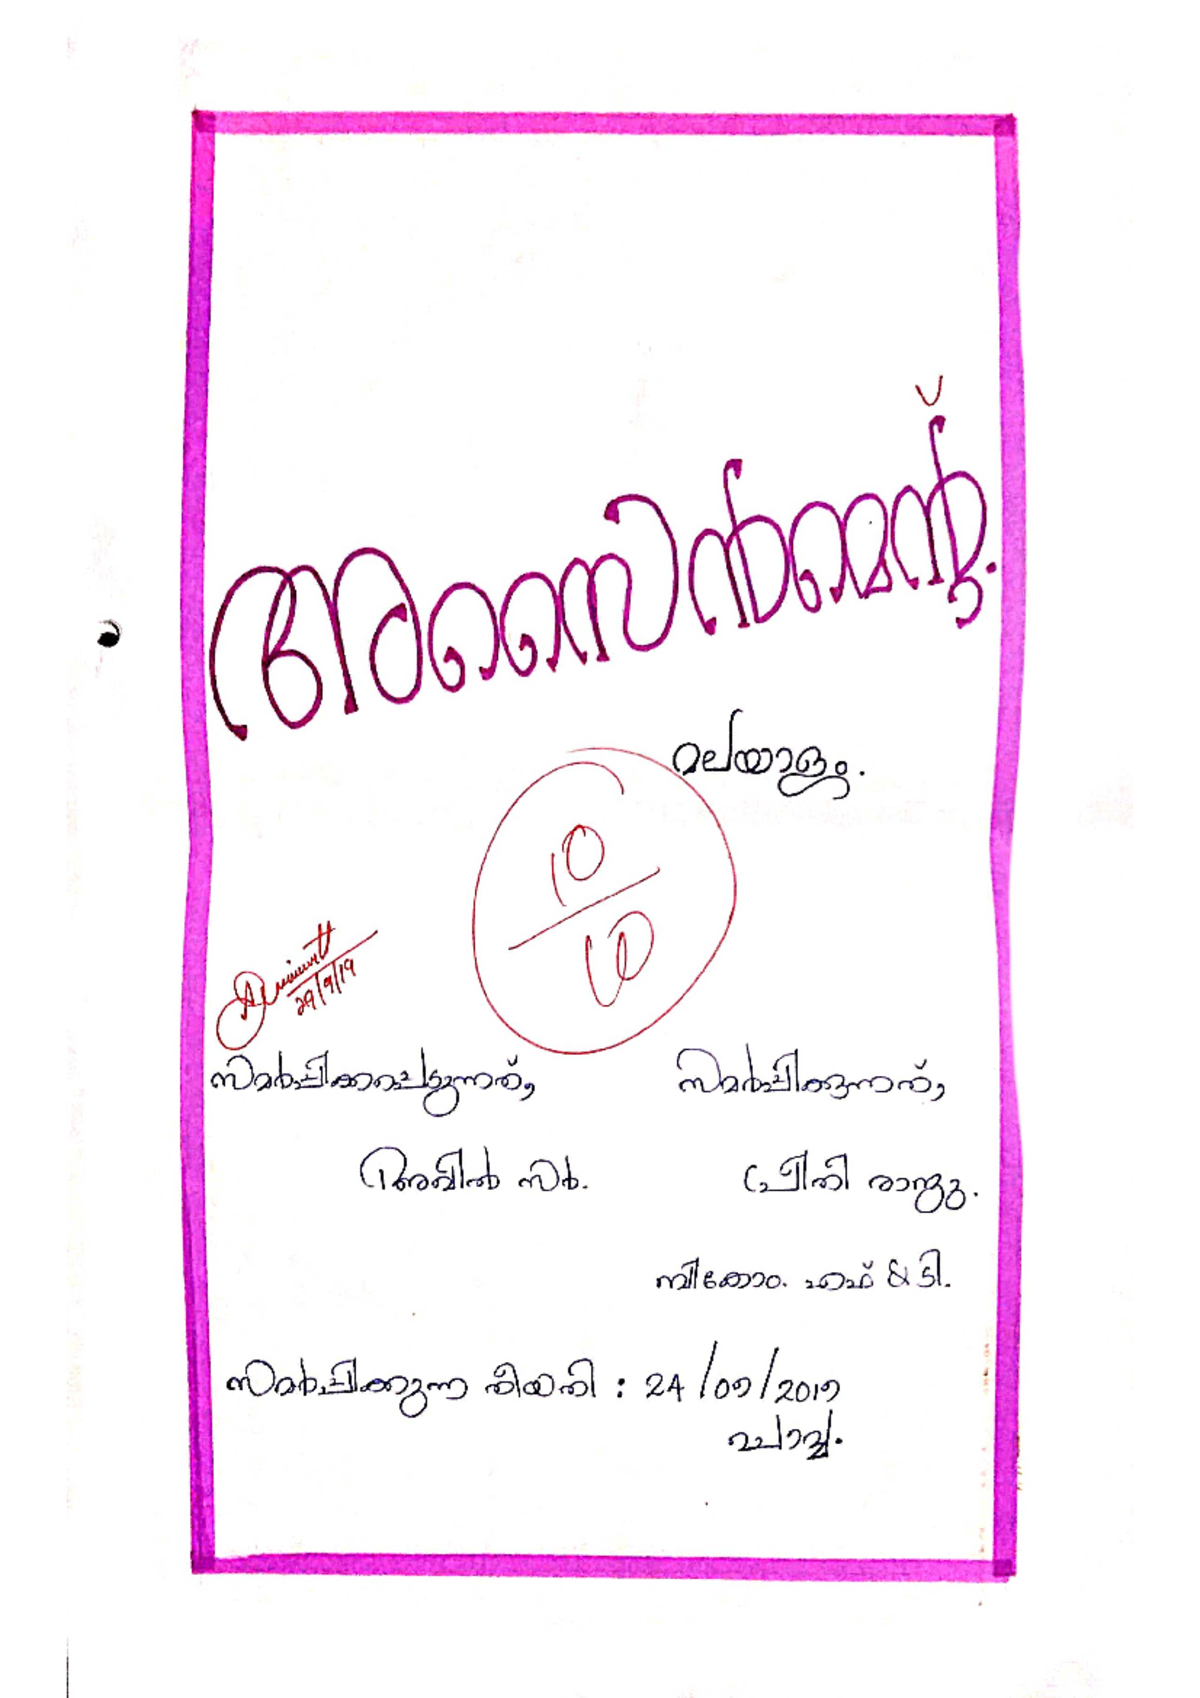 malayalam of assignment